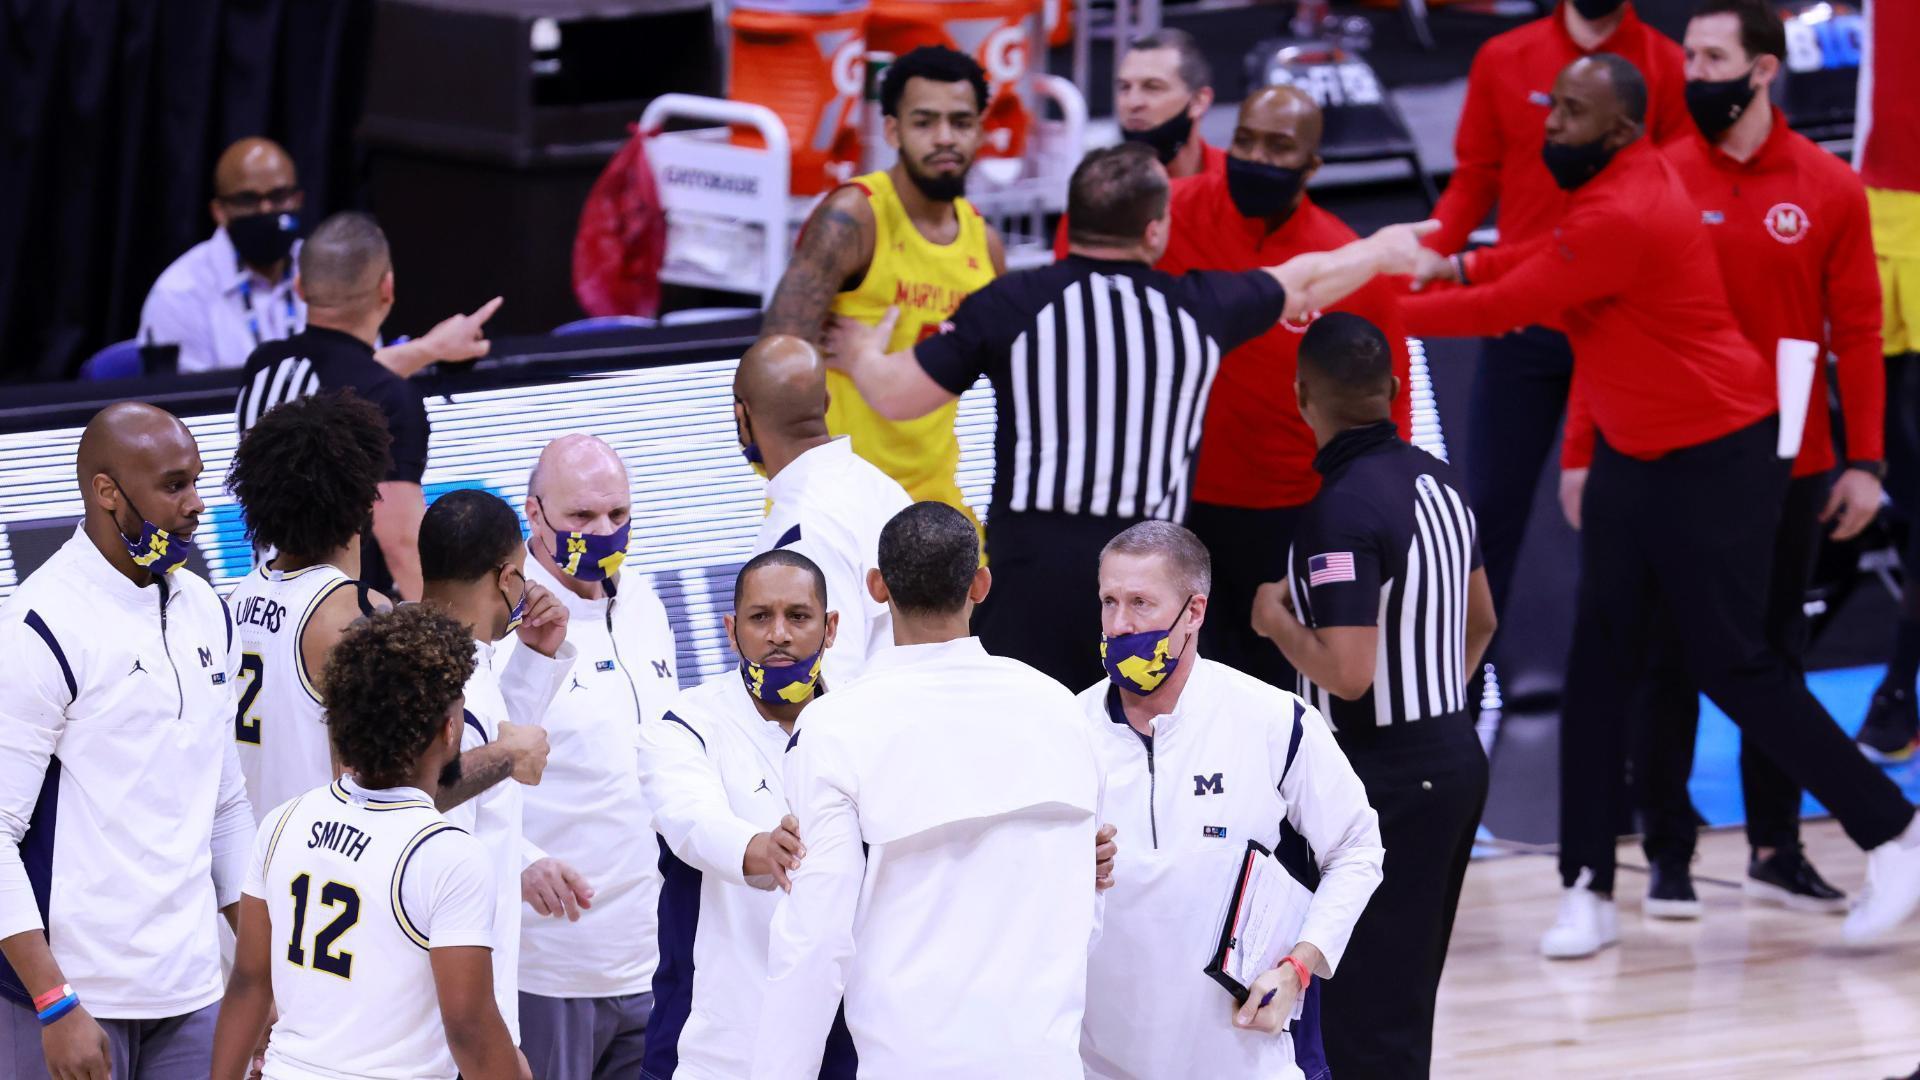 Michigan men’s basketball mentor Juwan Howard shot out in the wake of shouting match with Maryland’s Mark Turgeon